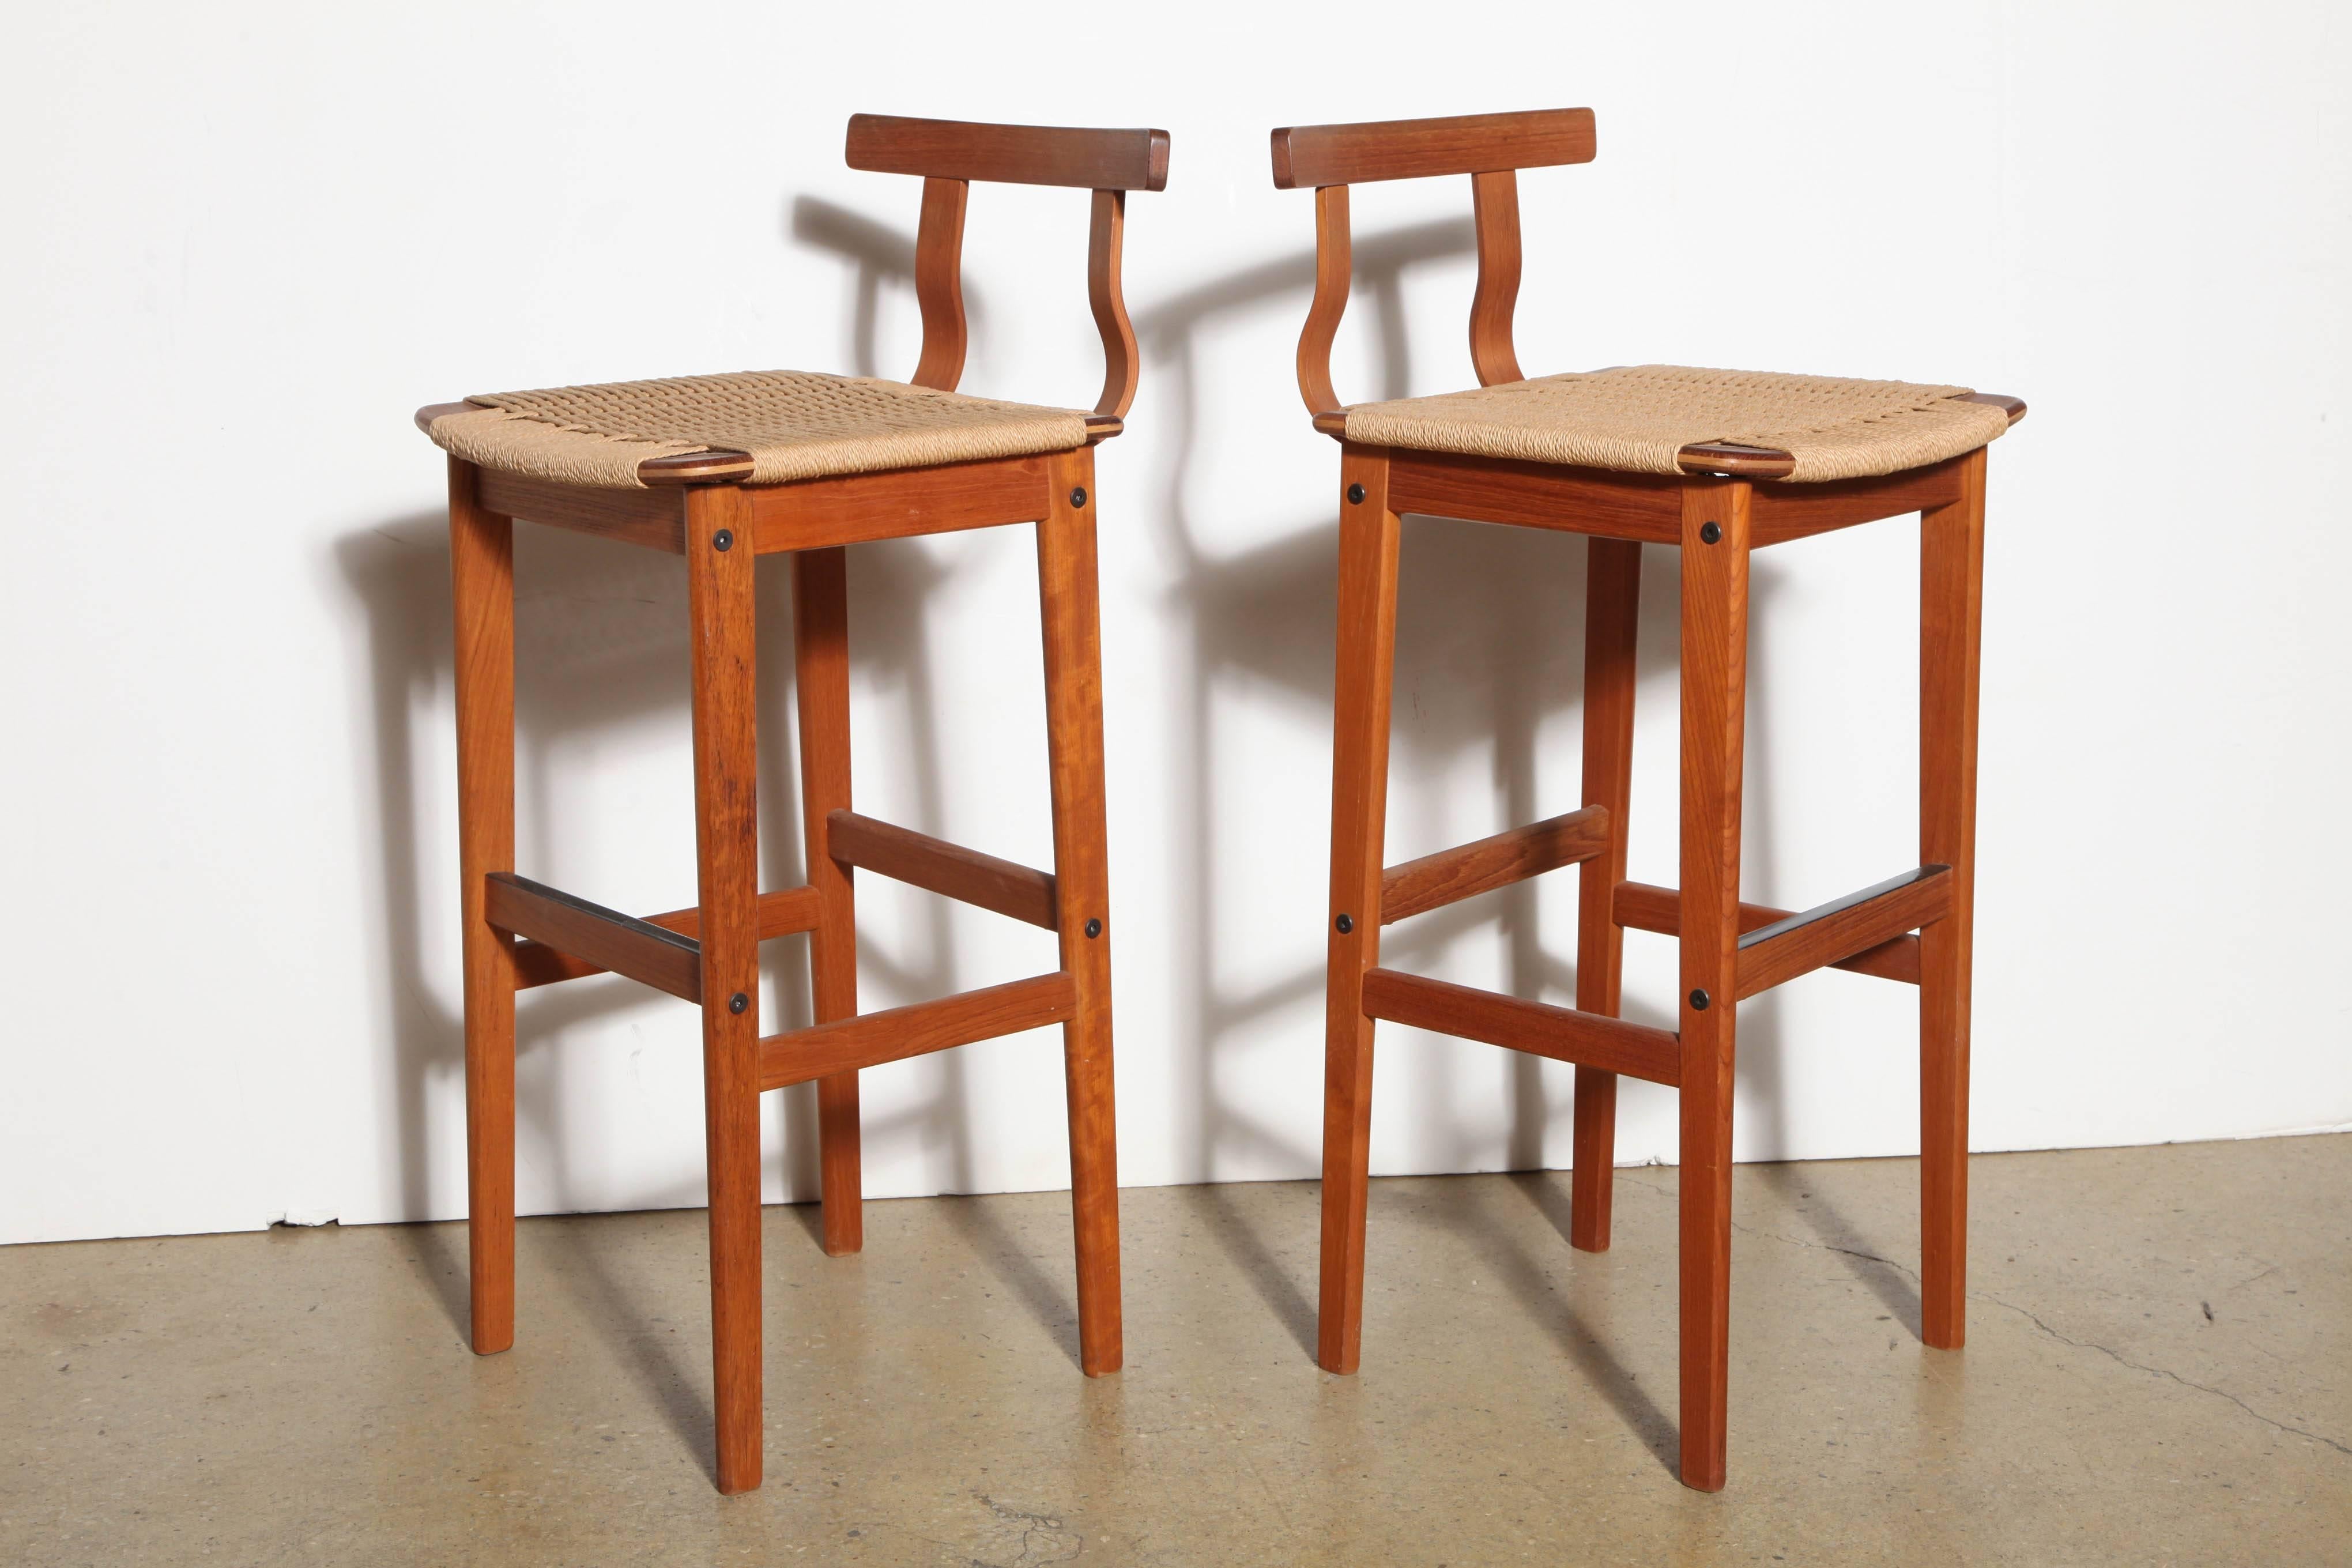 Pair of Scandinavian Modern teak and woven cord bar stools. Featuring an open rectangular teak framework with four supports, curved teak back support, woven heavy rope cord seat and footrest. Niels Otto Moller style, late 1960s. Natural. Neutral.